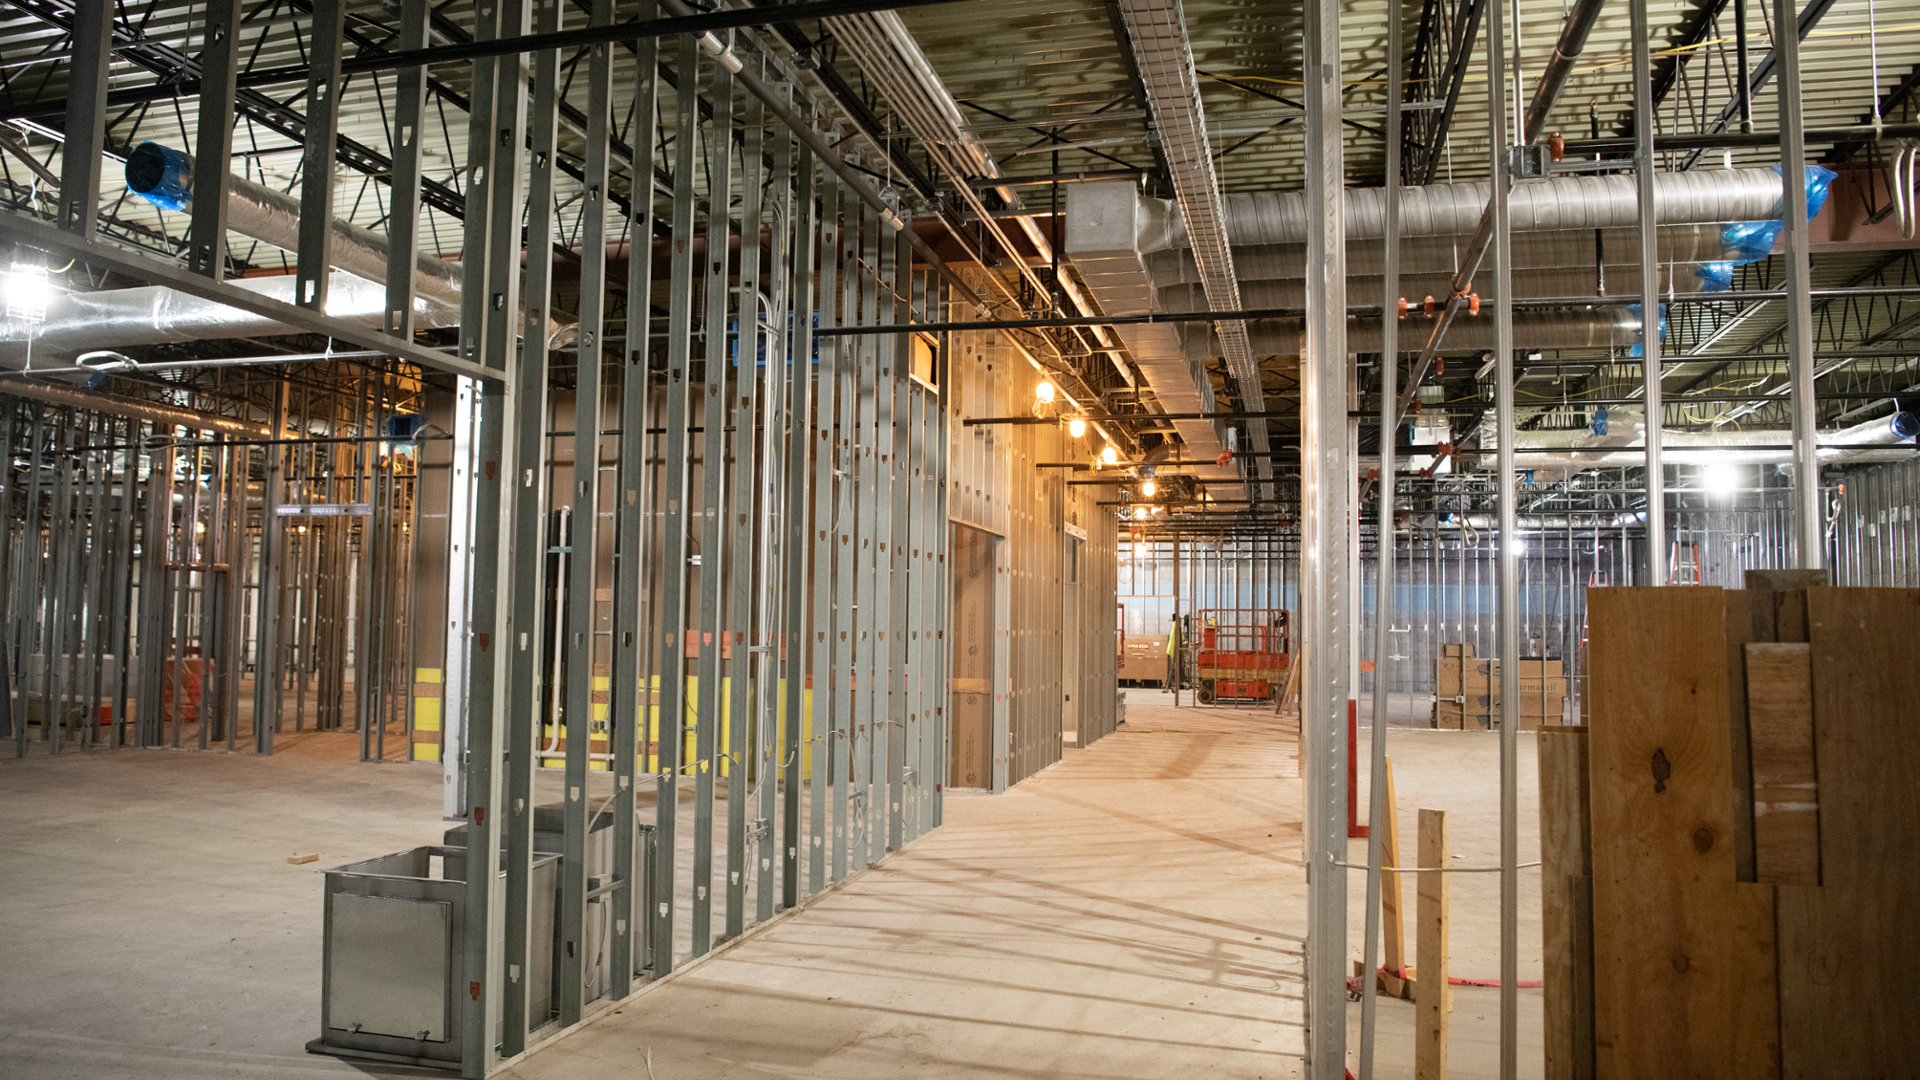 Interior of the Engineering facility in progress.